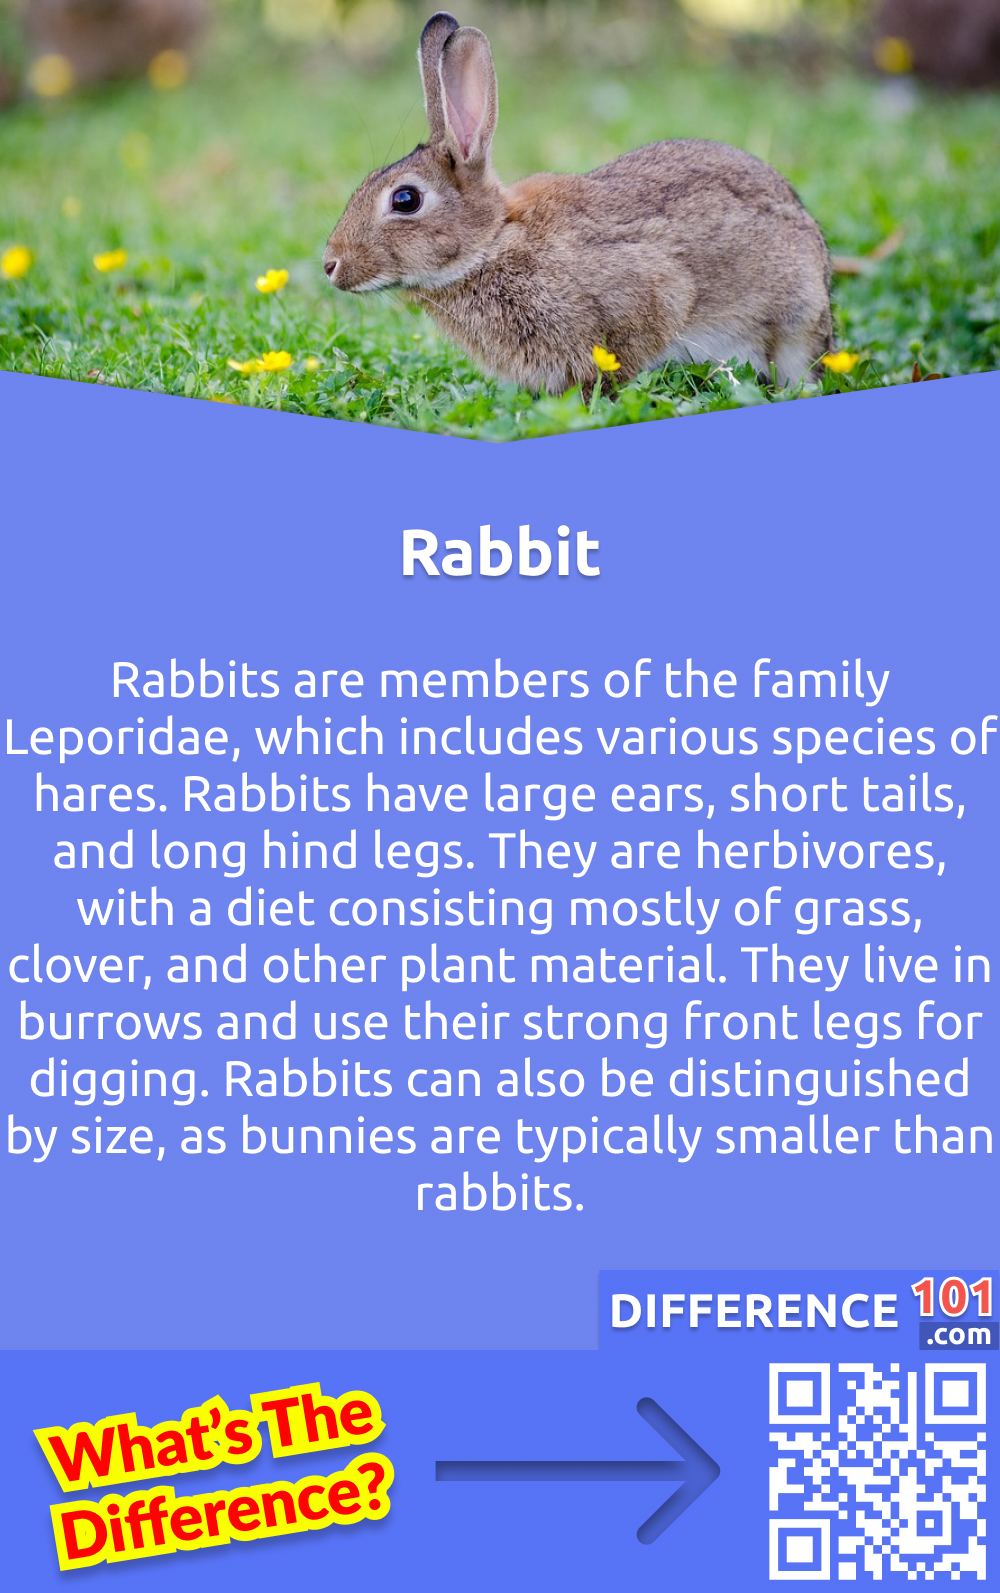 What Is Rabbit? Rabbits are members of the family Leporidae, which includes various species of hares. Rabbits have large ears, short tails, and long hind legs. They are herbivores, with a diet consisting mostly of grass, clover, and other plant material. They live in burrows and use their strong front legs for digging. Rabbits can also be distinguished by size, as bunnies are typically smaller than rabbits. 
